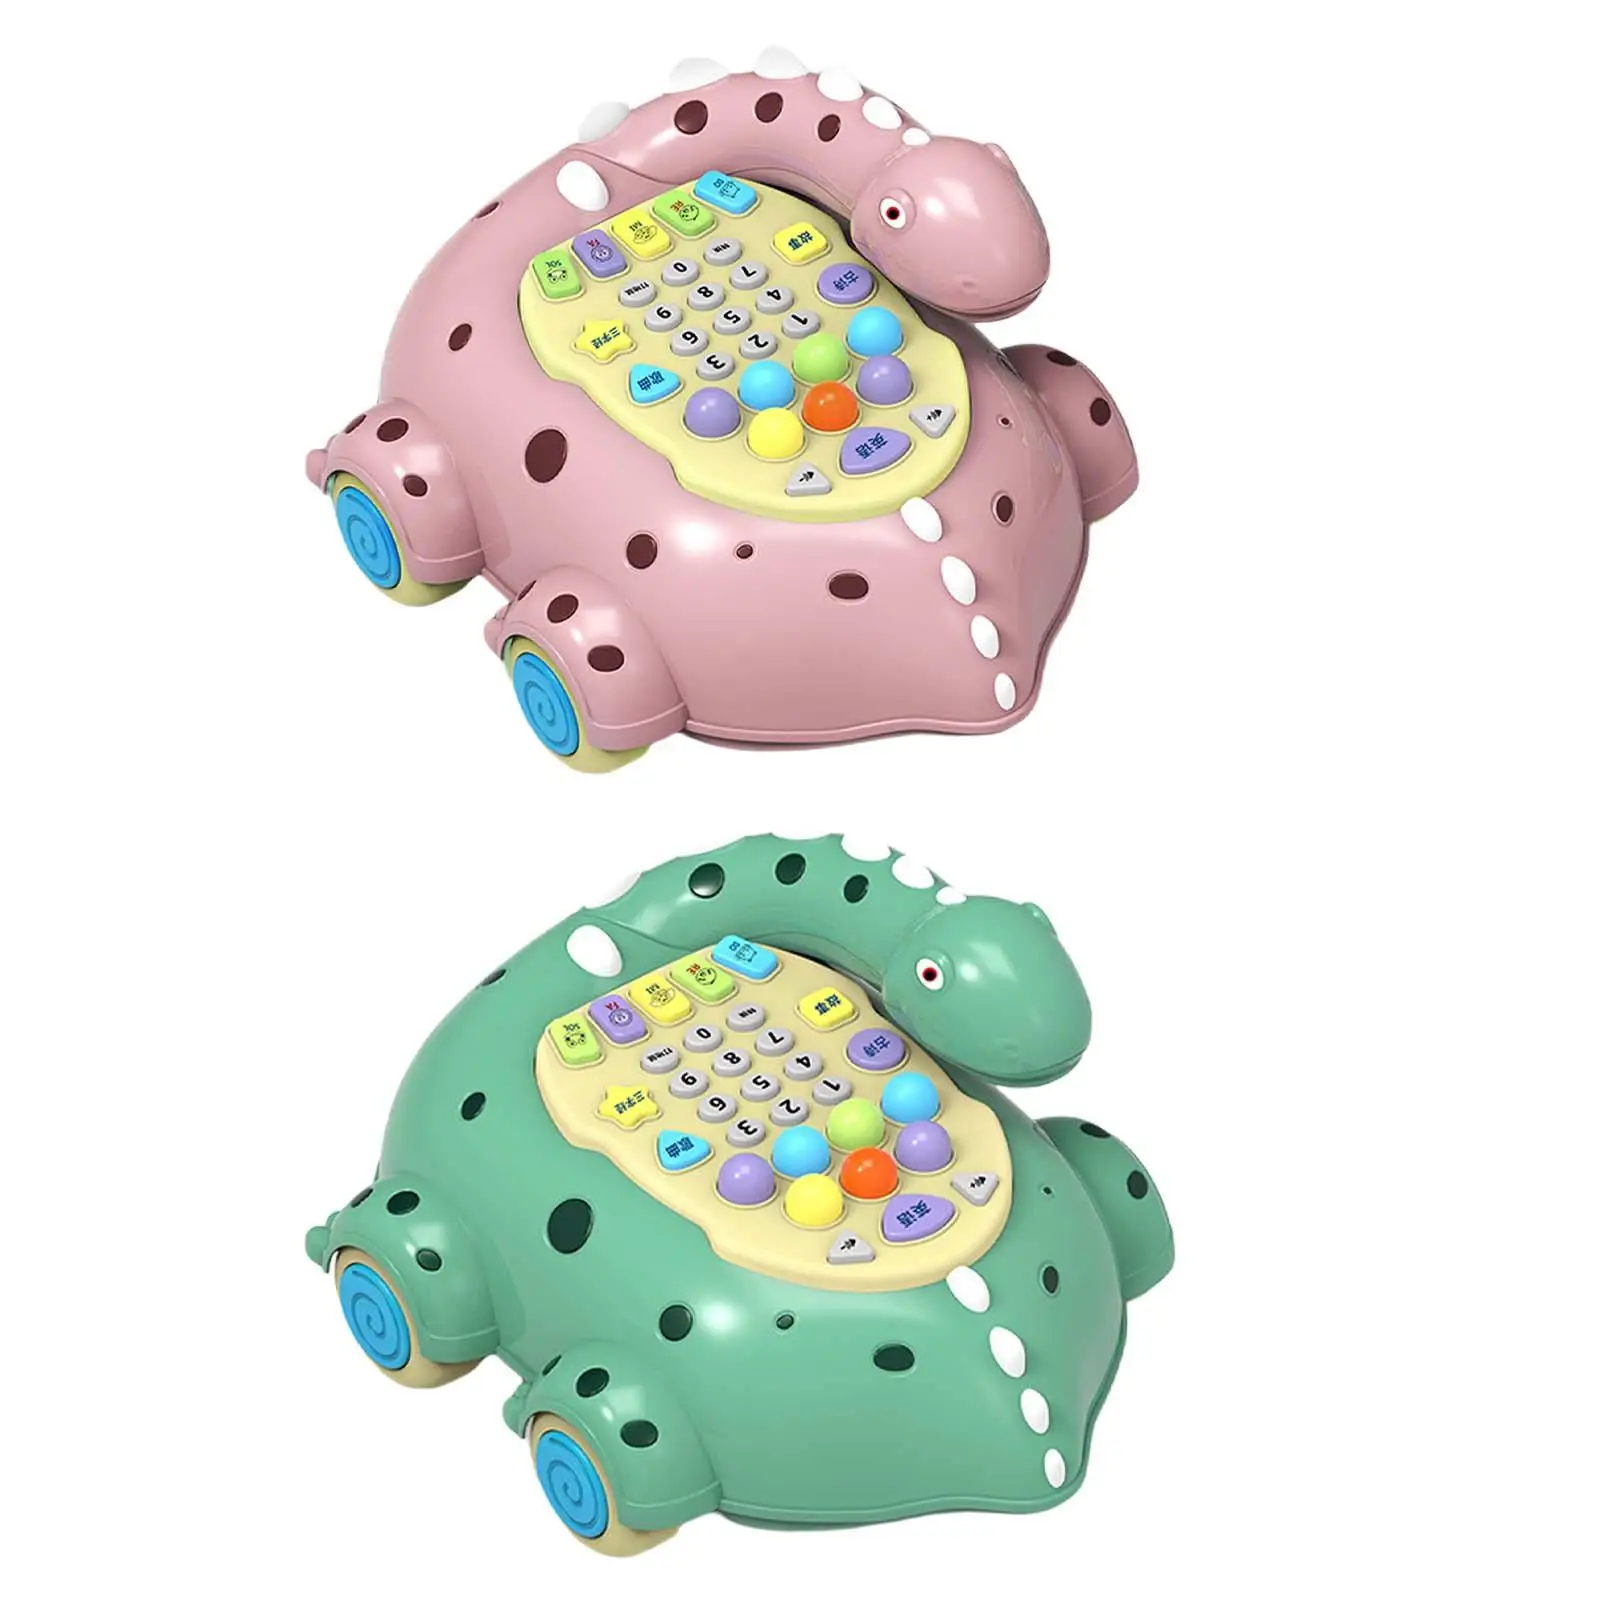 Baby Telephone Toy Pretend Play Multifunctional music Light Phone Toy for Game Interaction Preschool Learning Gift